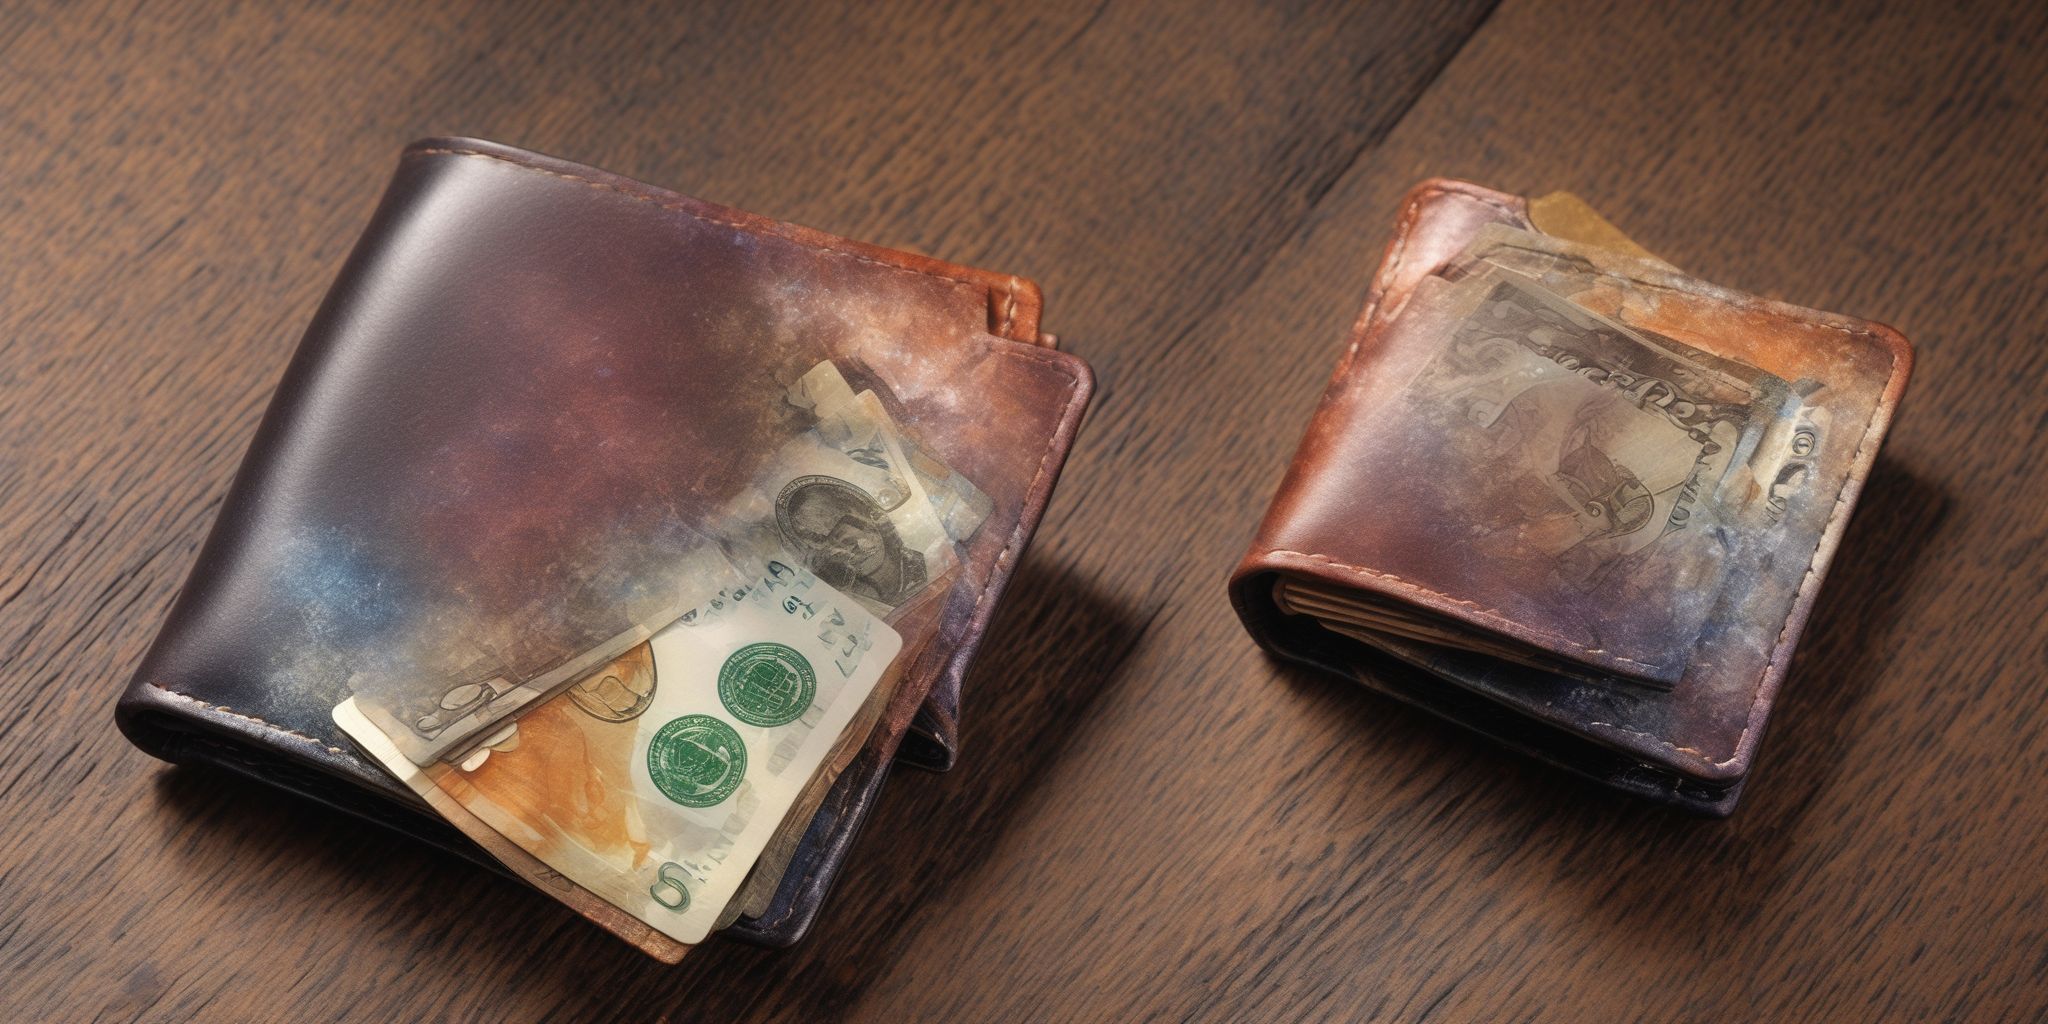 Magic wallet  in realistic, photographic style